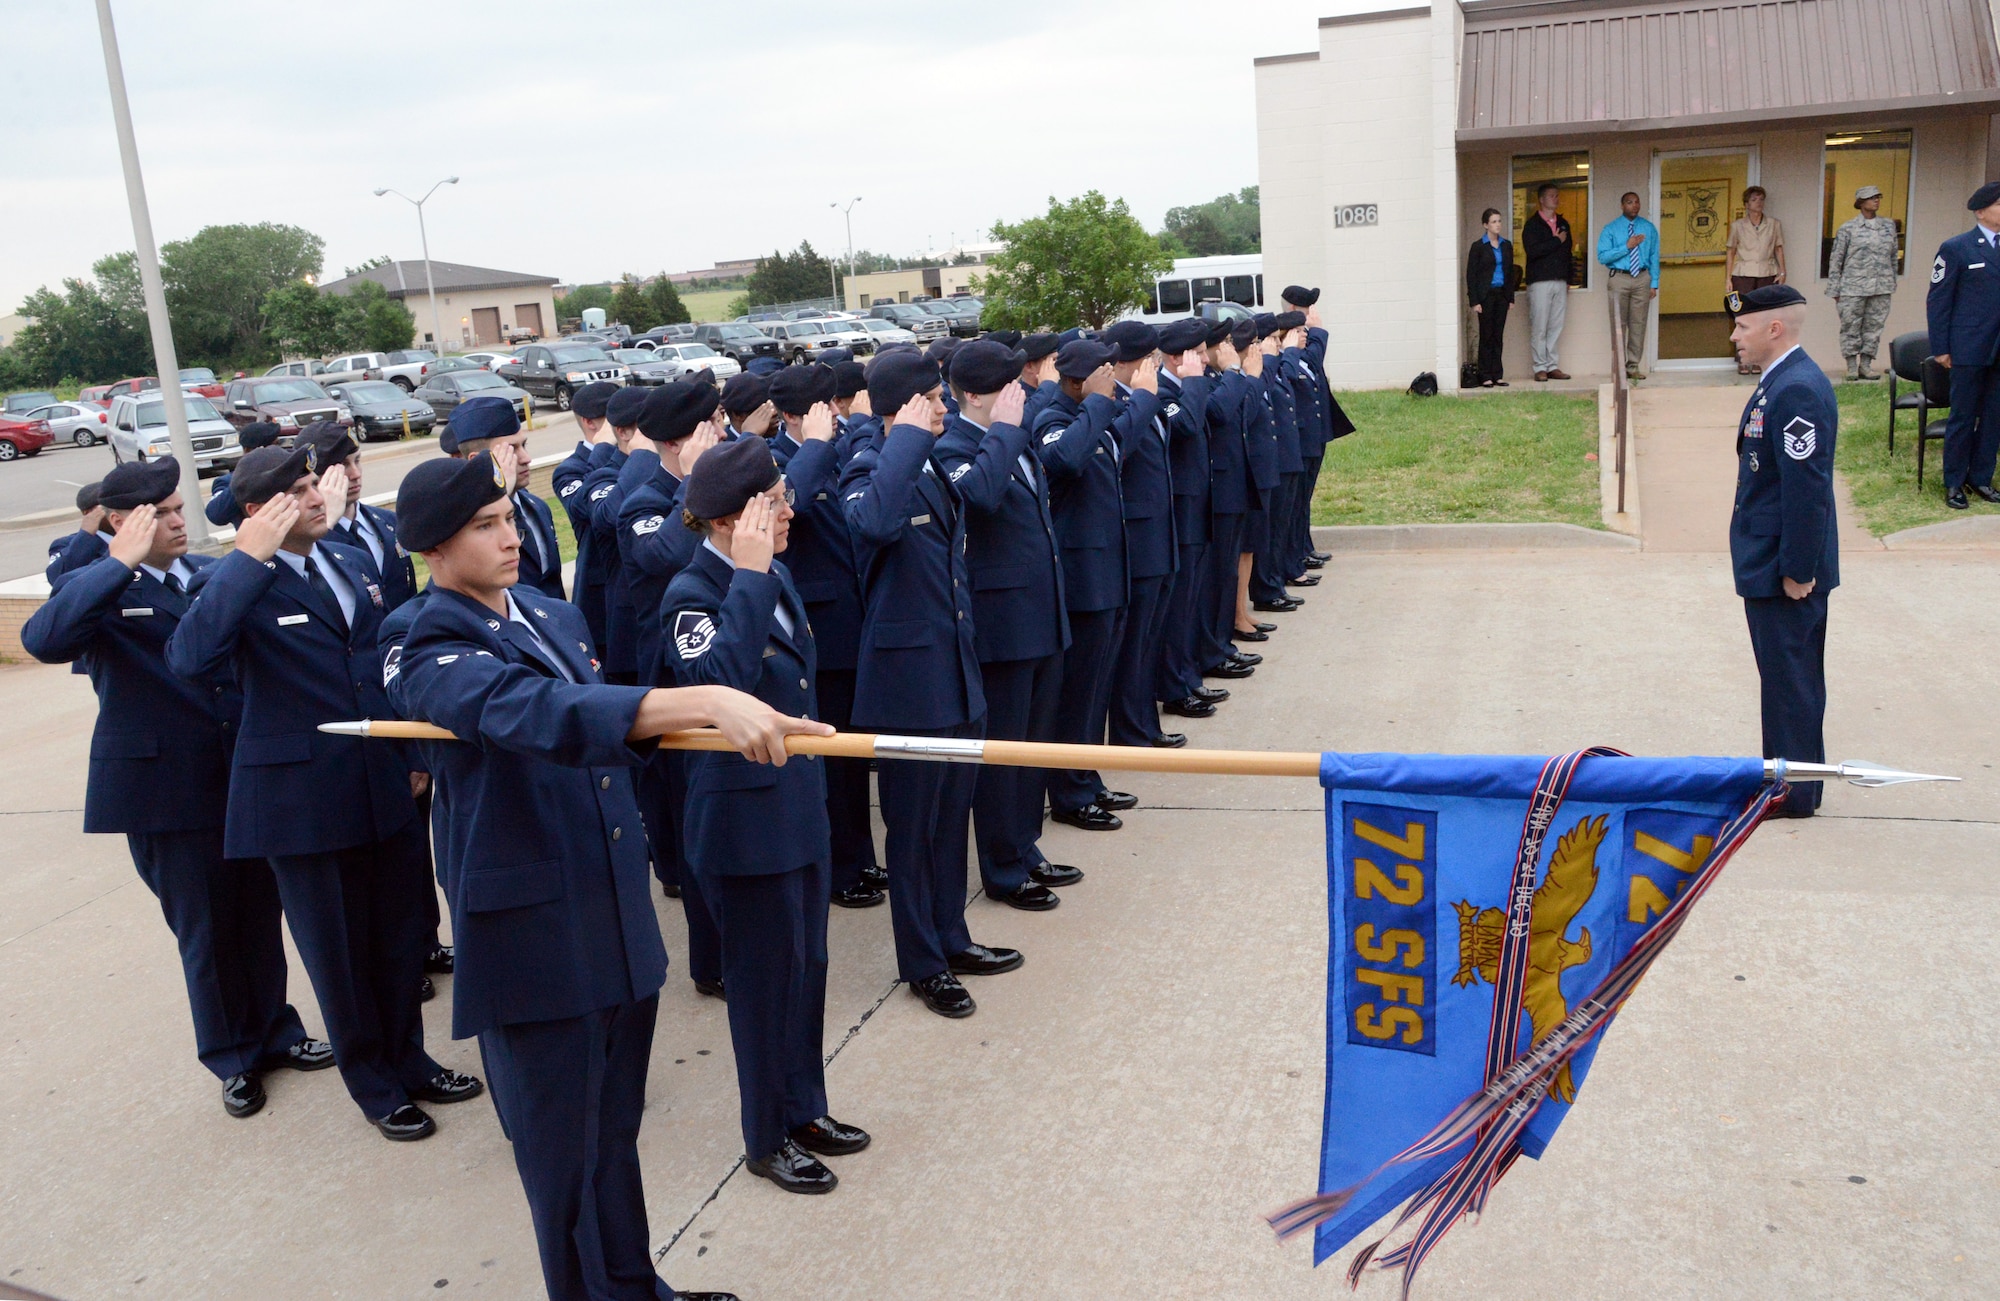 Members of the 72nd Security Forces Squadron stand in formation as the American flag is raised during a Reveille ceremony May 12, officially marking the beginning of National Police Week. The week falls whenever the 15th of May is, honoring fallen military and civilian police and first responders. (Air Force photo by Kelly White)